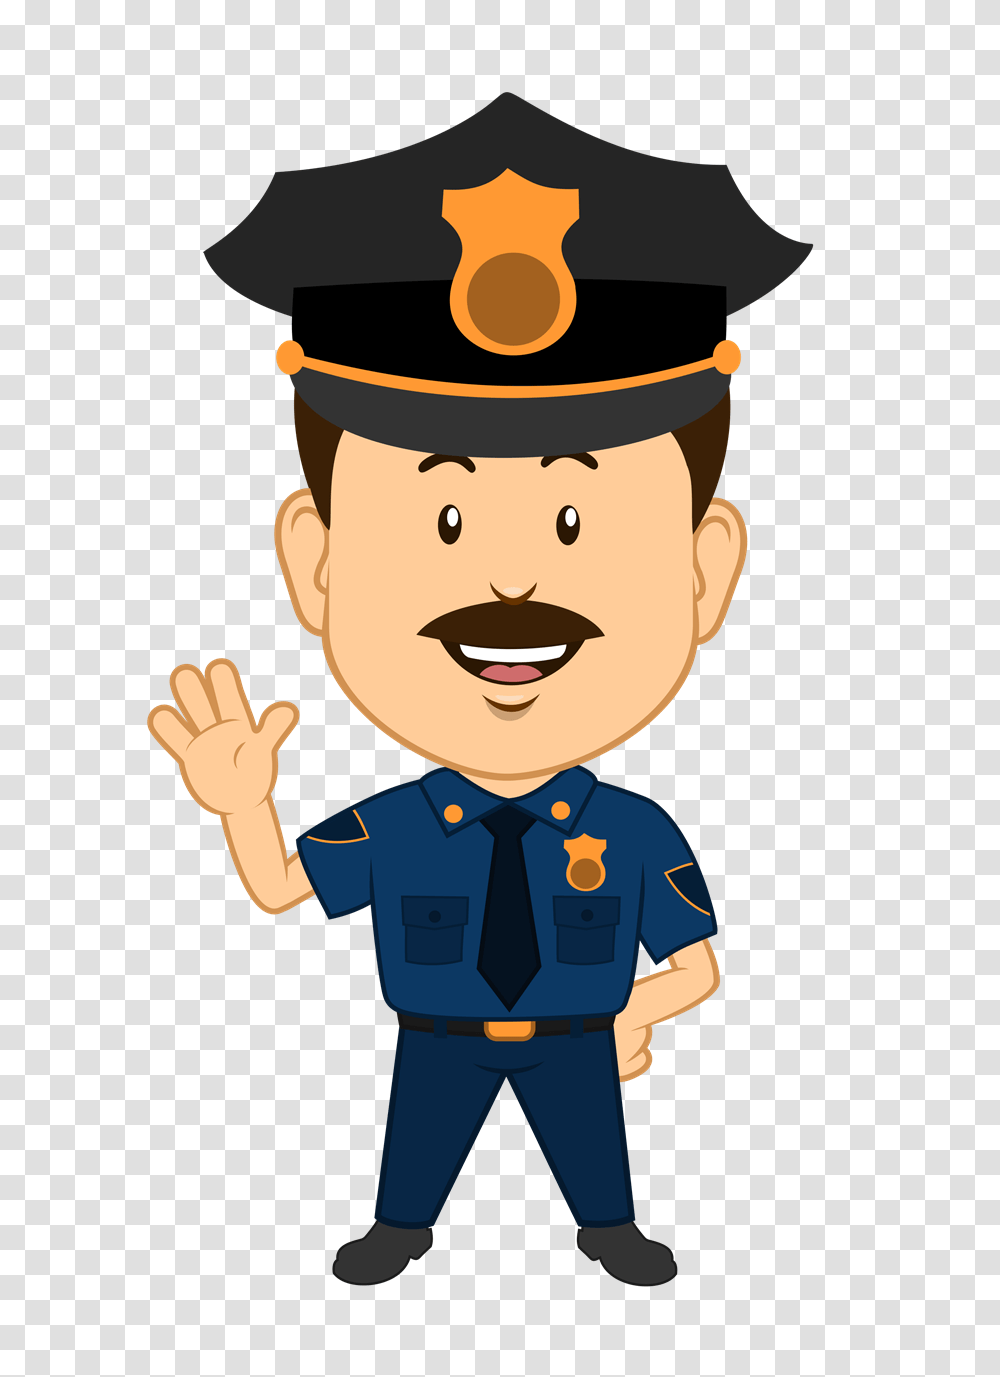 Image Result For Police Officer Images Clip Art Kids, Person, Human, Military Uniform, Toy Transparent Png